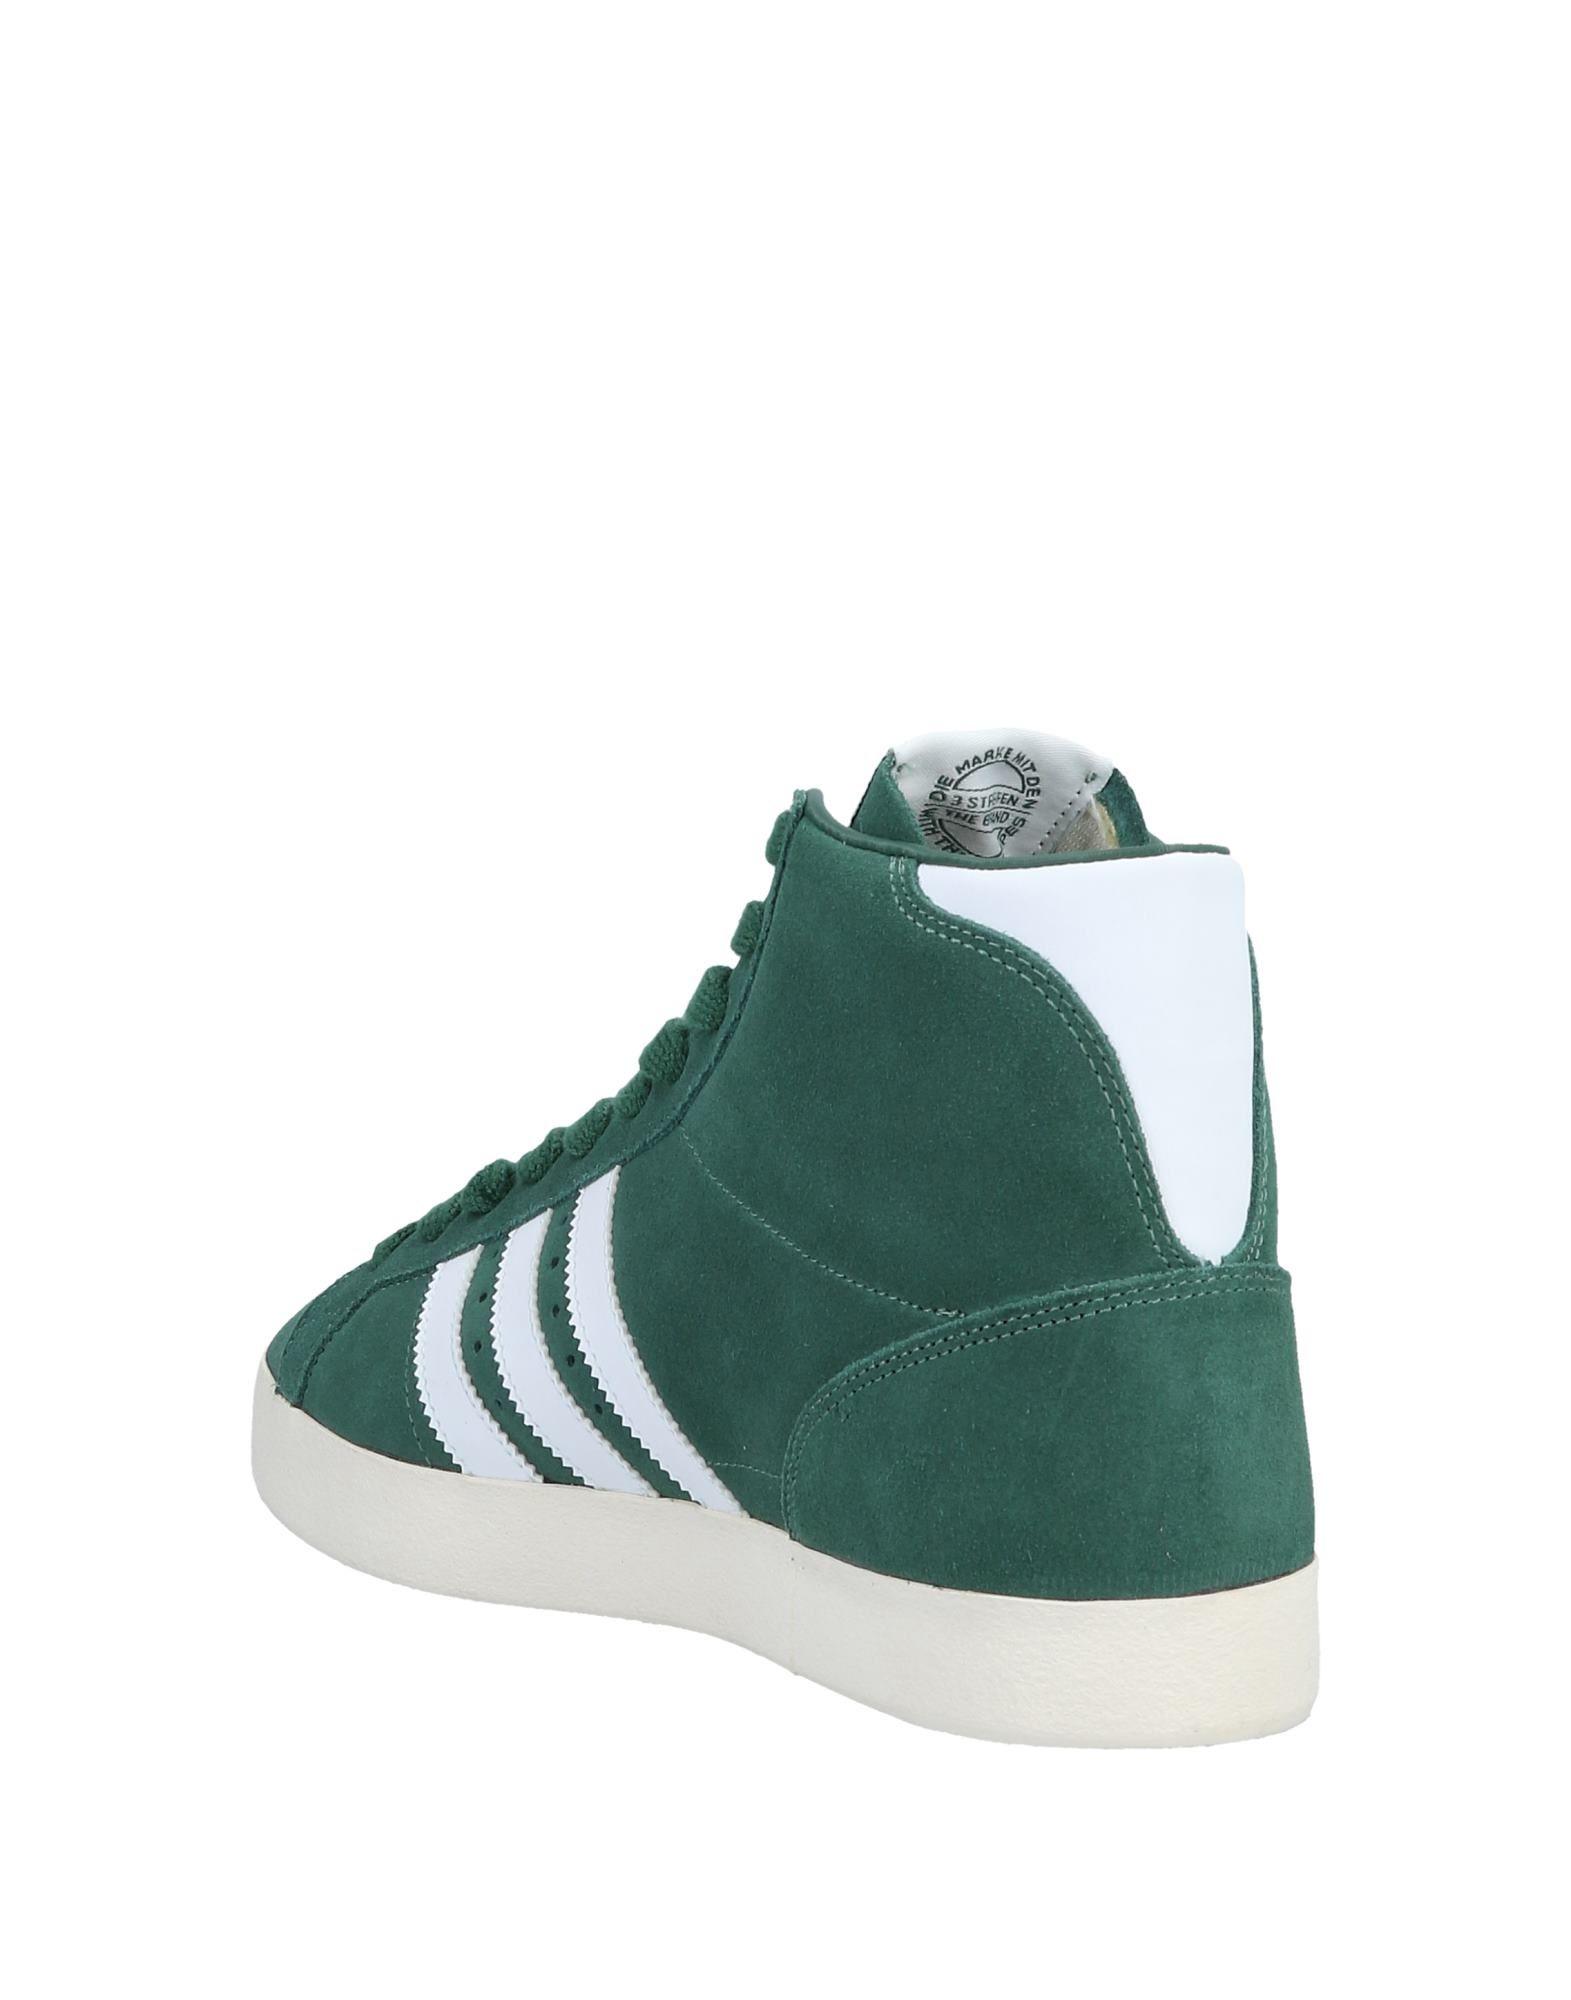 green adidas high top sneakers